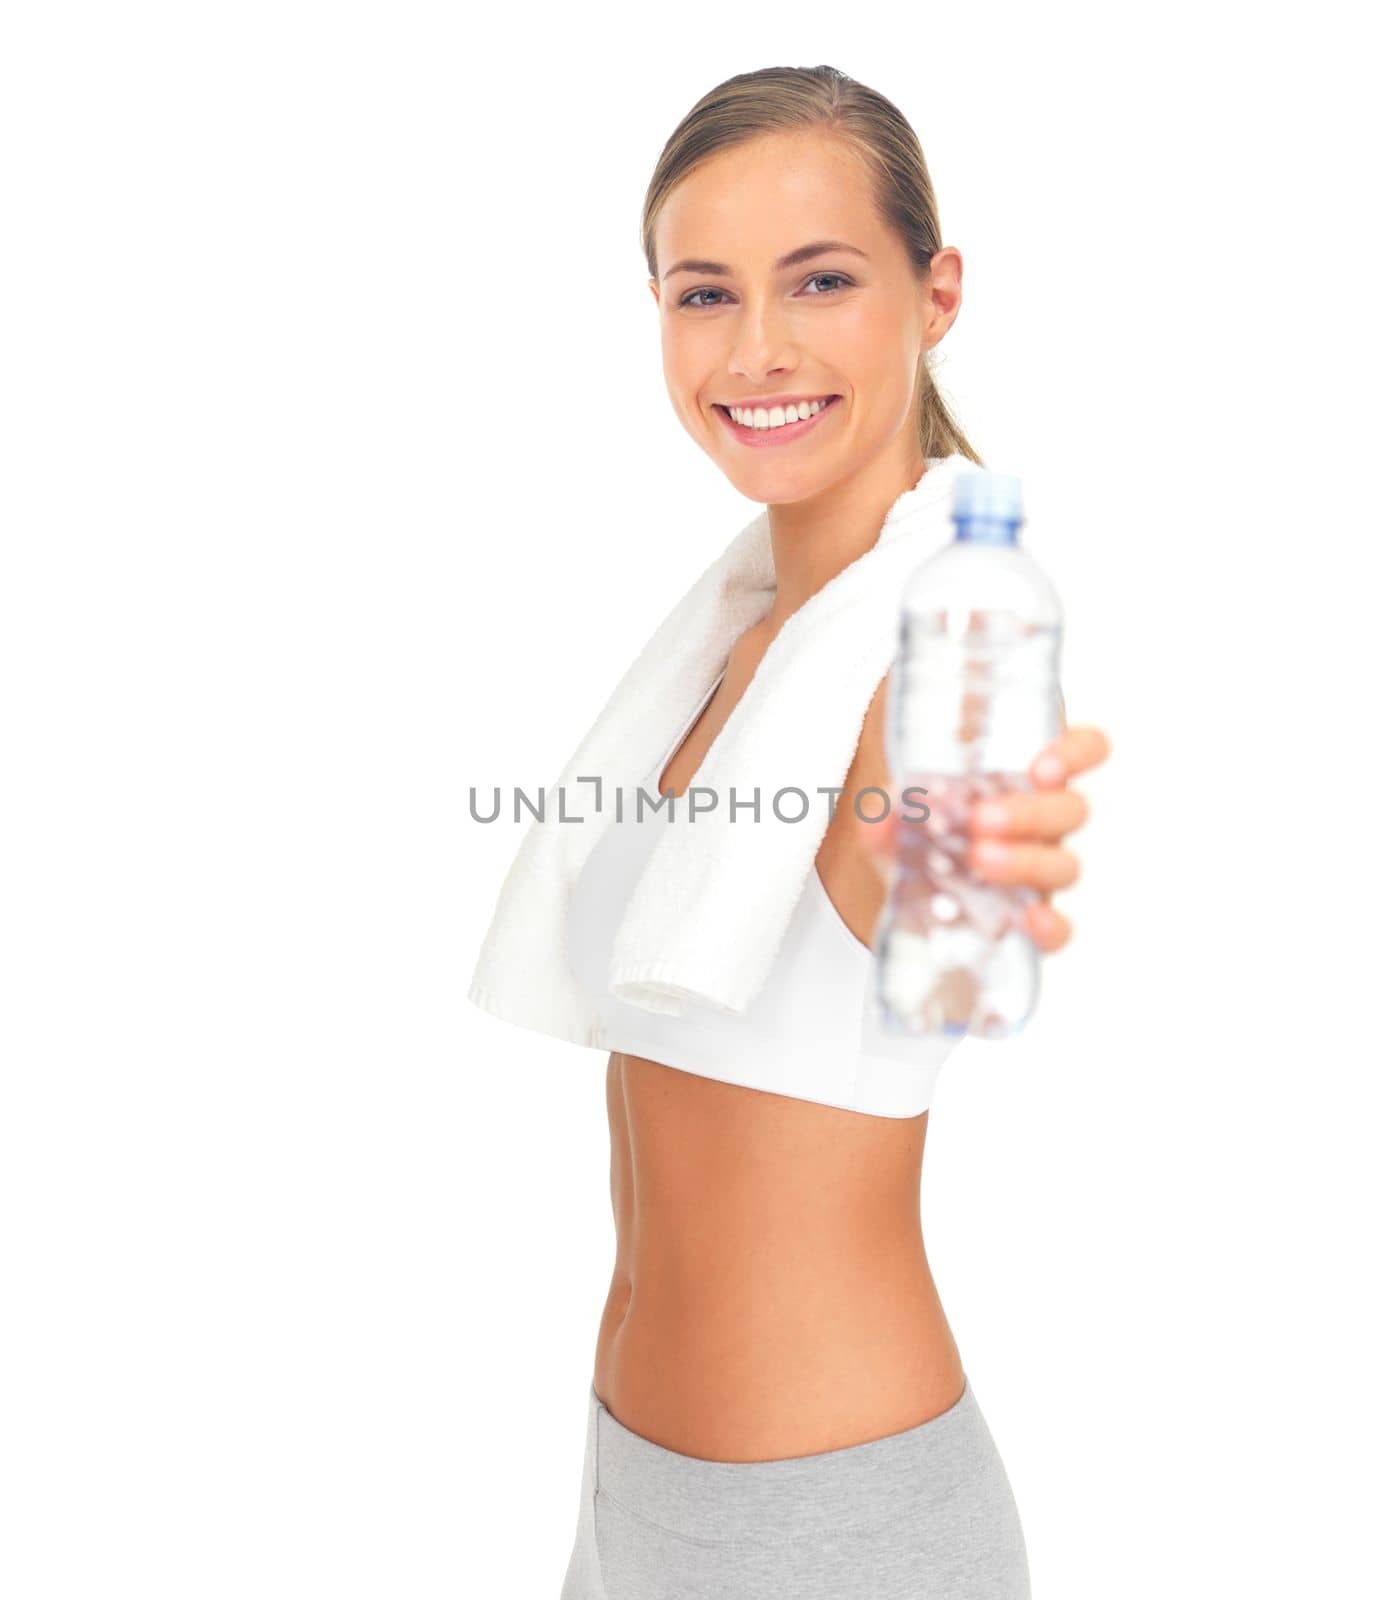 Studio, fitness woman and water bottle for health, diet workout and training motivation or offer. Liquid, nutrition and sports athlete mockup with hand holding product, isolated on white background by YuriArcurs